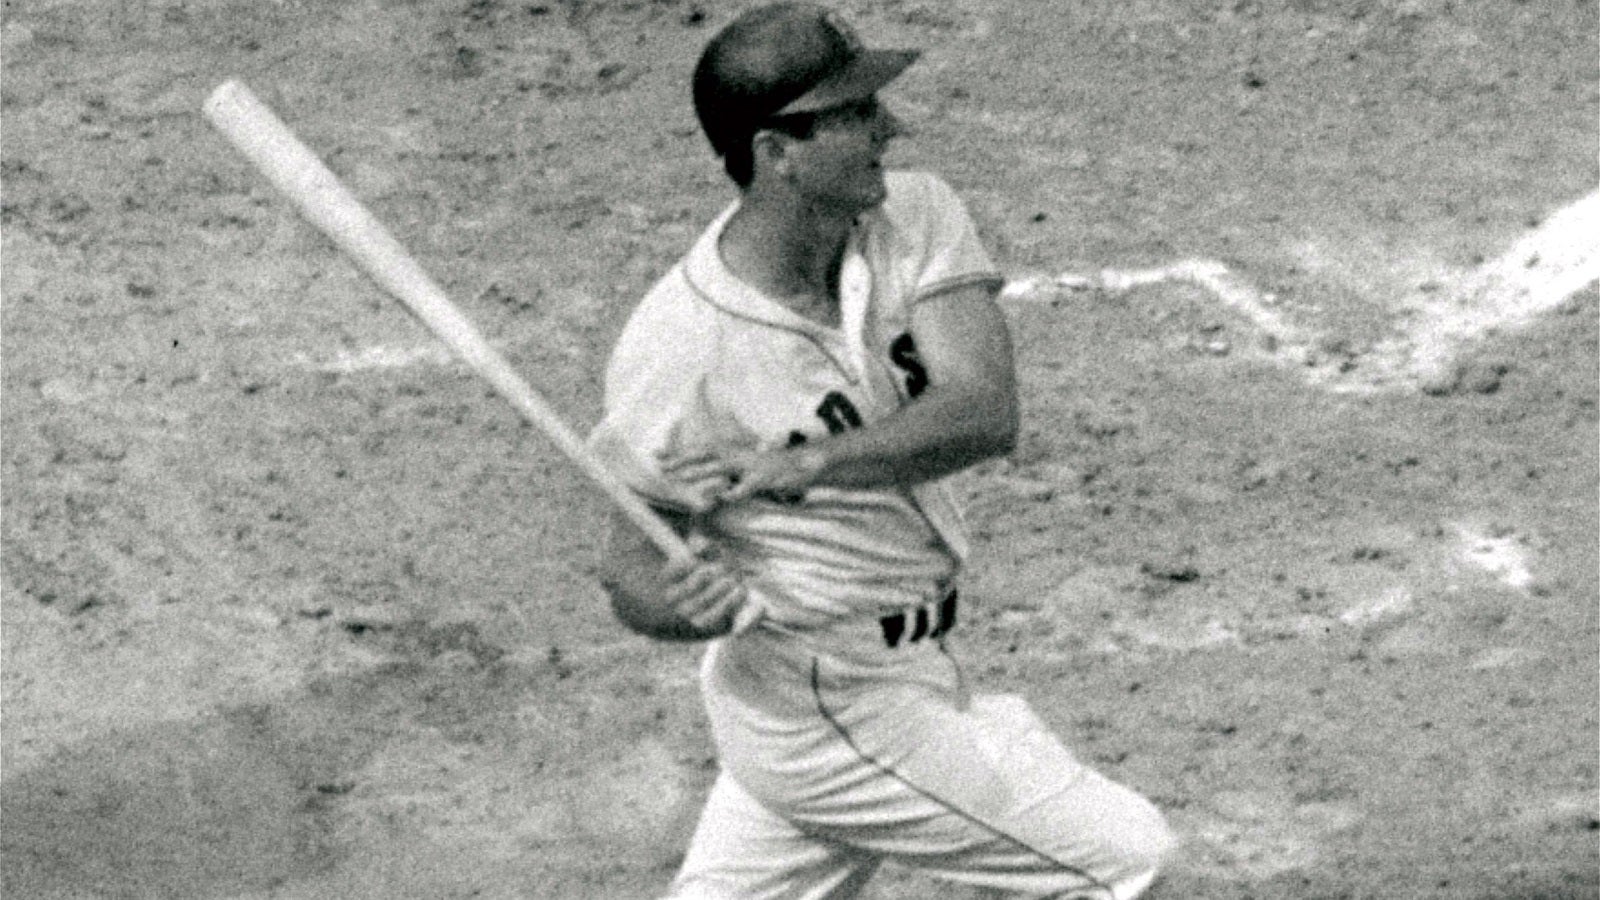 8 great Carl Yastrzemski facts from his 23-year Red Sox career